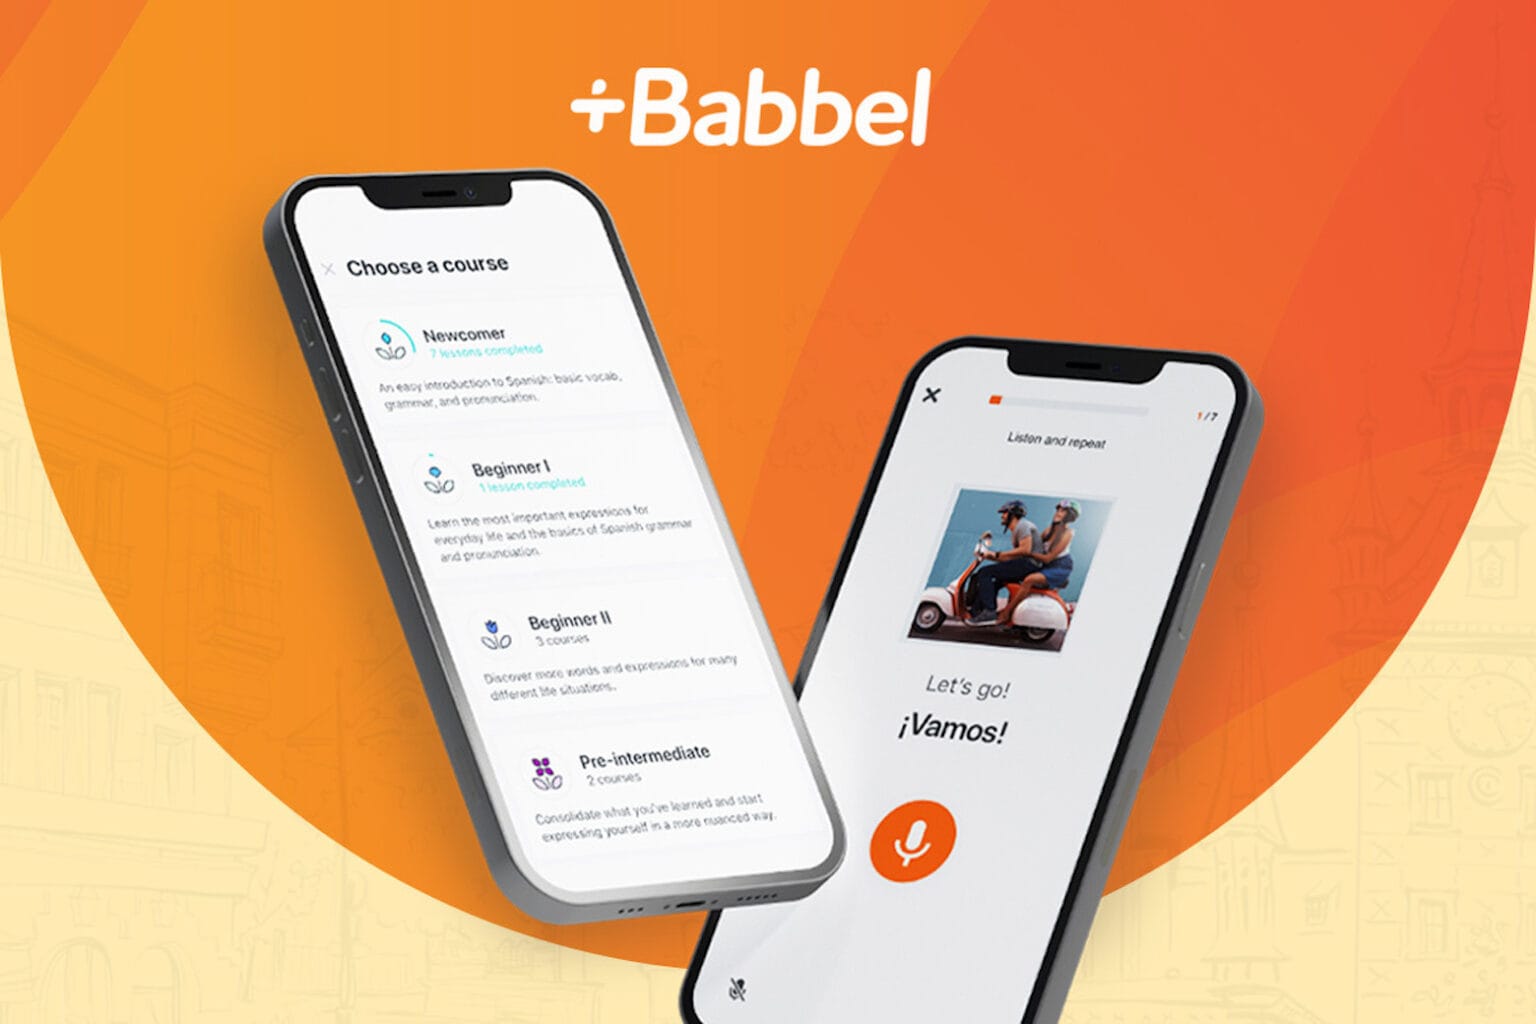 Learn new languages for life with the award-winning Babbel, now only $199.97 until May 23.